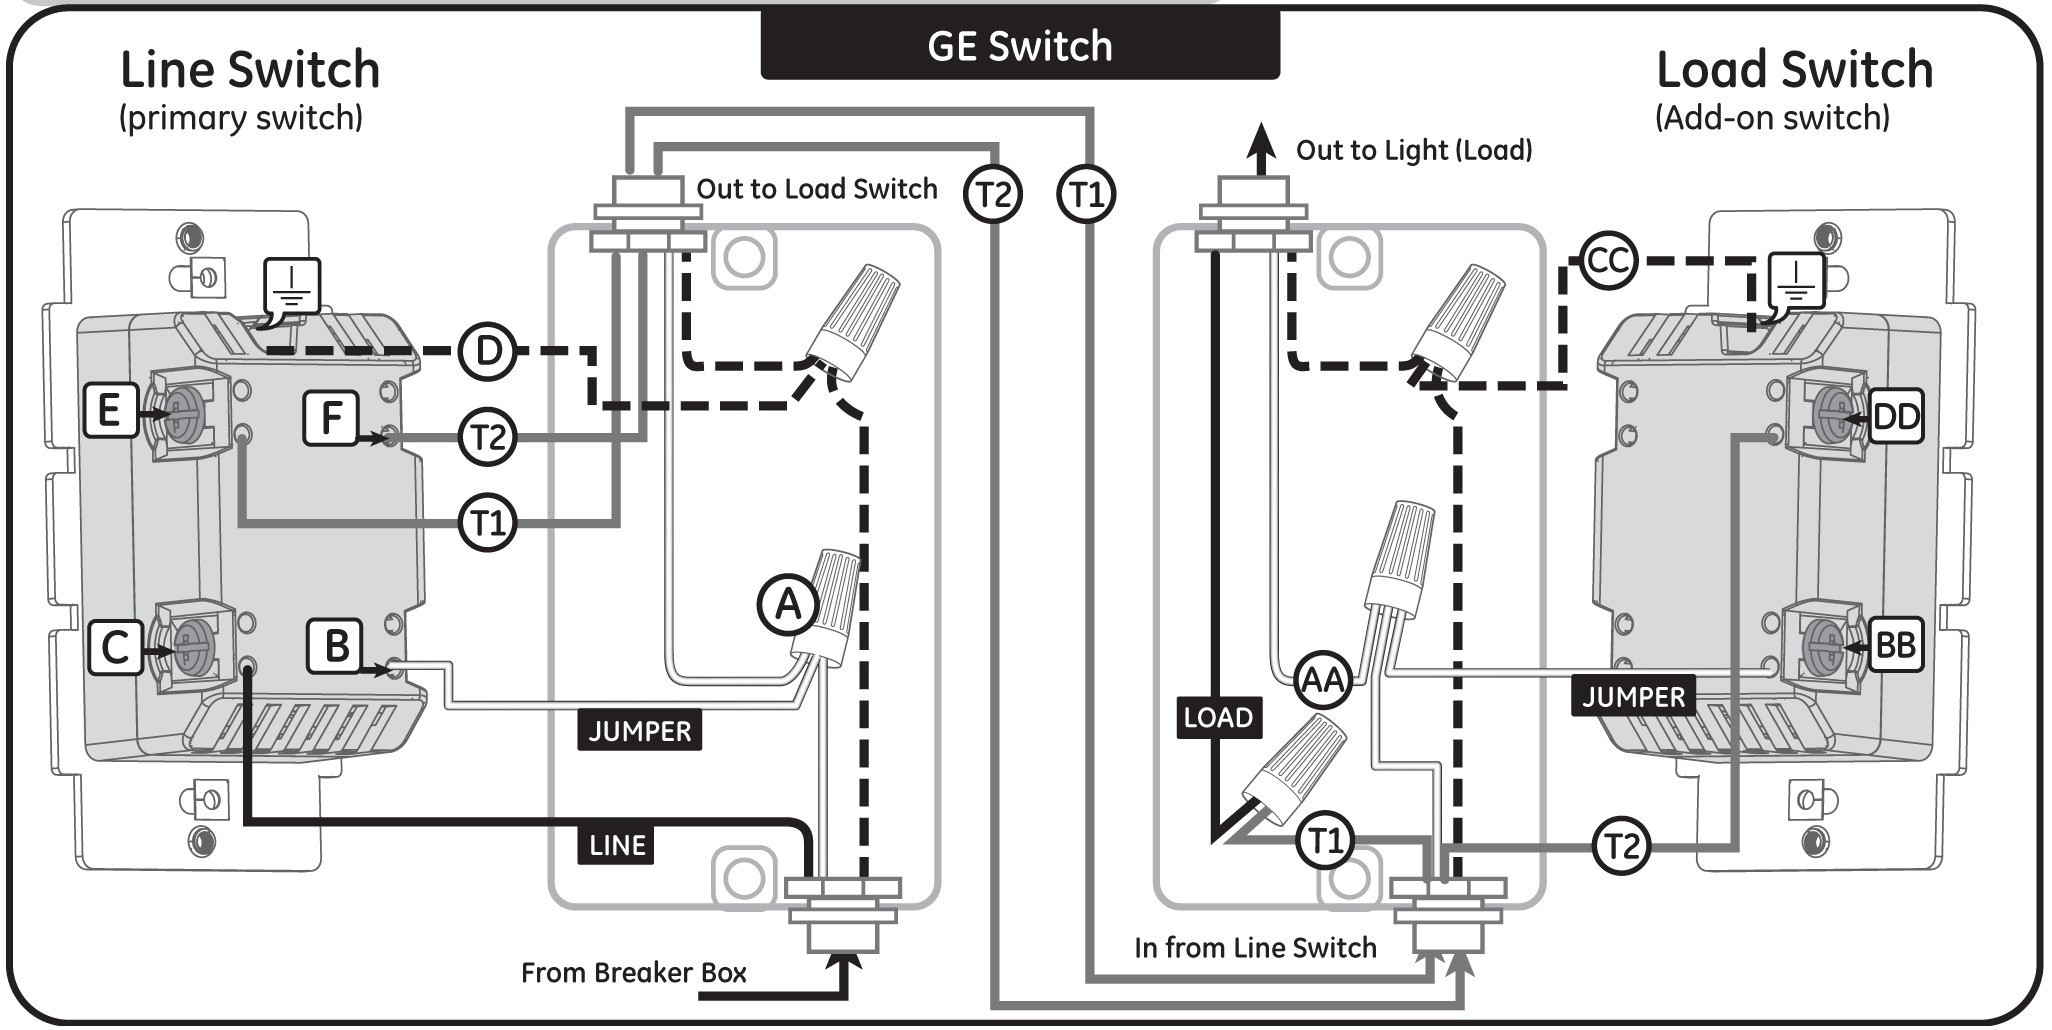 3 Way Switch Wiring Diagram With Dimmer Inspirational Leviton 3 Way Dimmer Switch Wiring Diagram – Wiring Diagram Collection